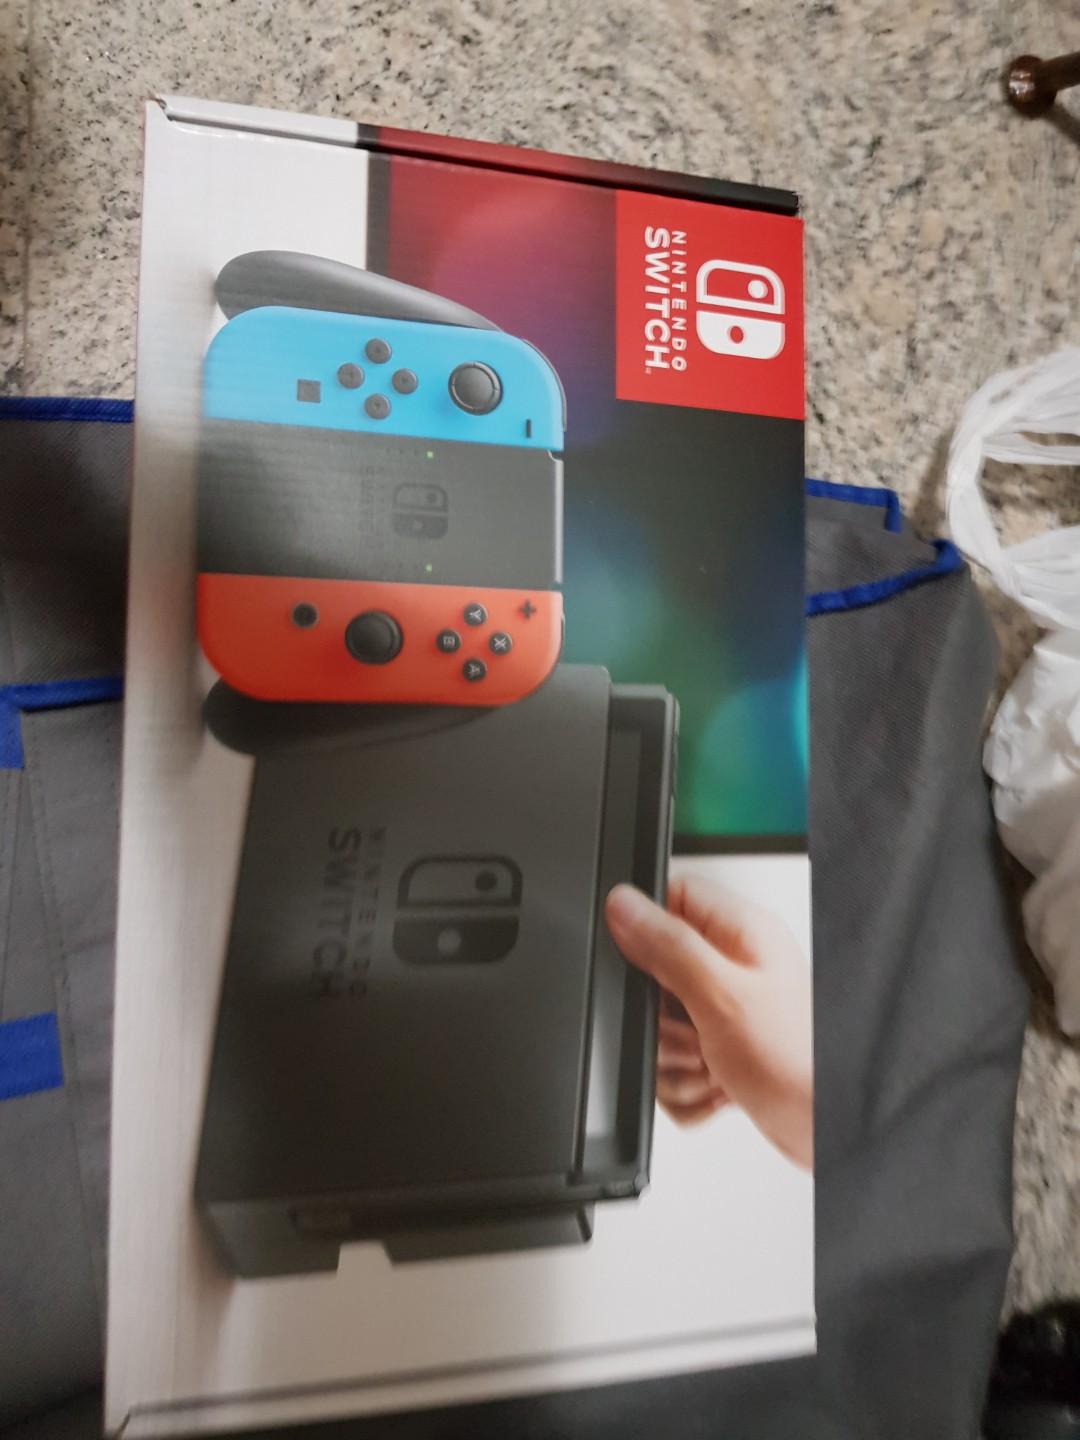 second hand nintendo switch for sale